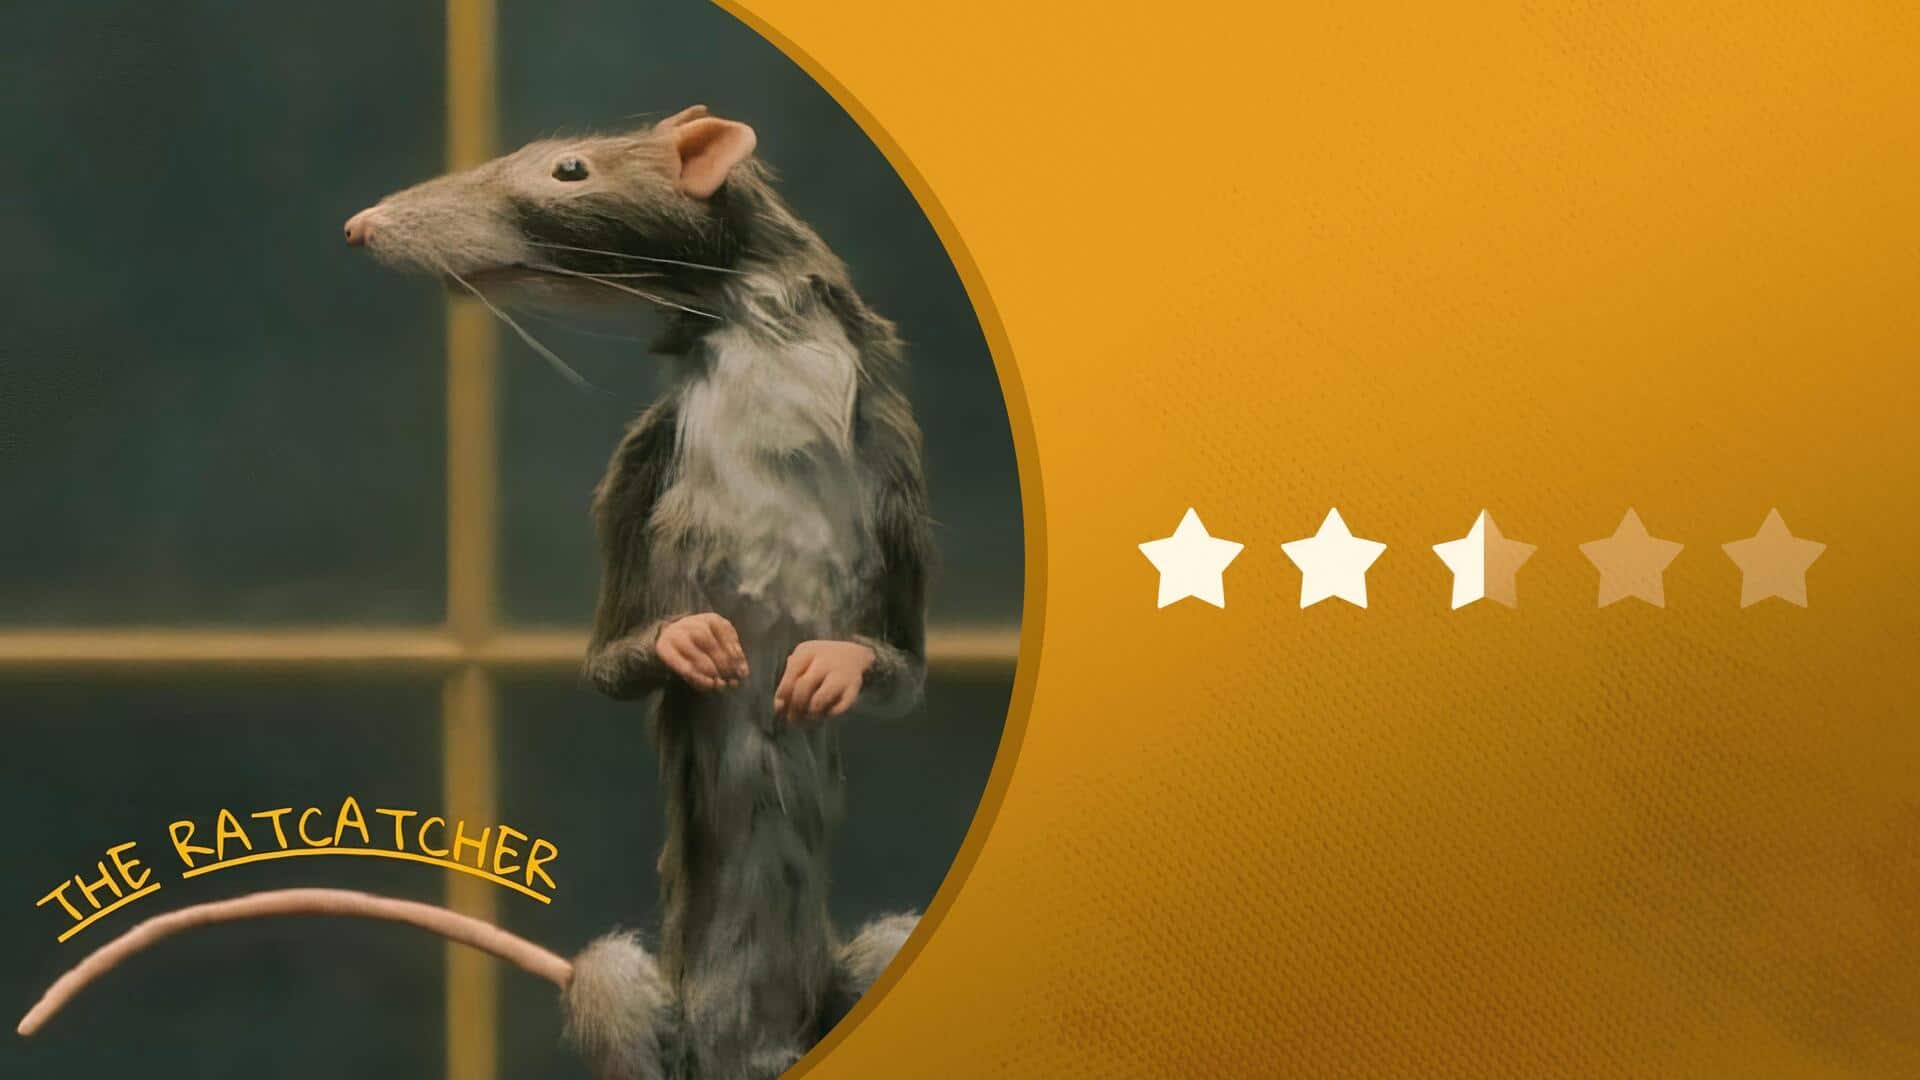 Wes Anderson's 'The Rat Catcher' review: Not consistently engaging